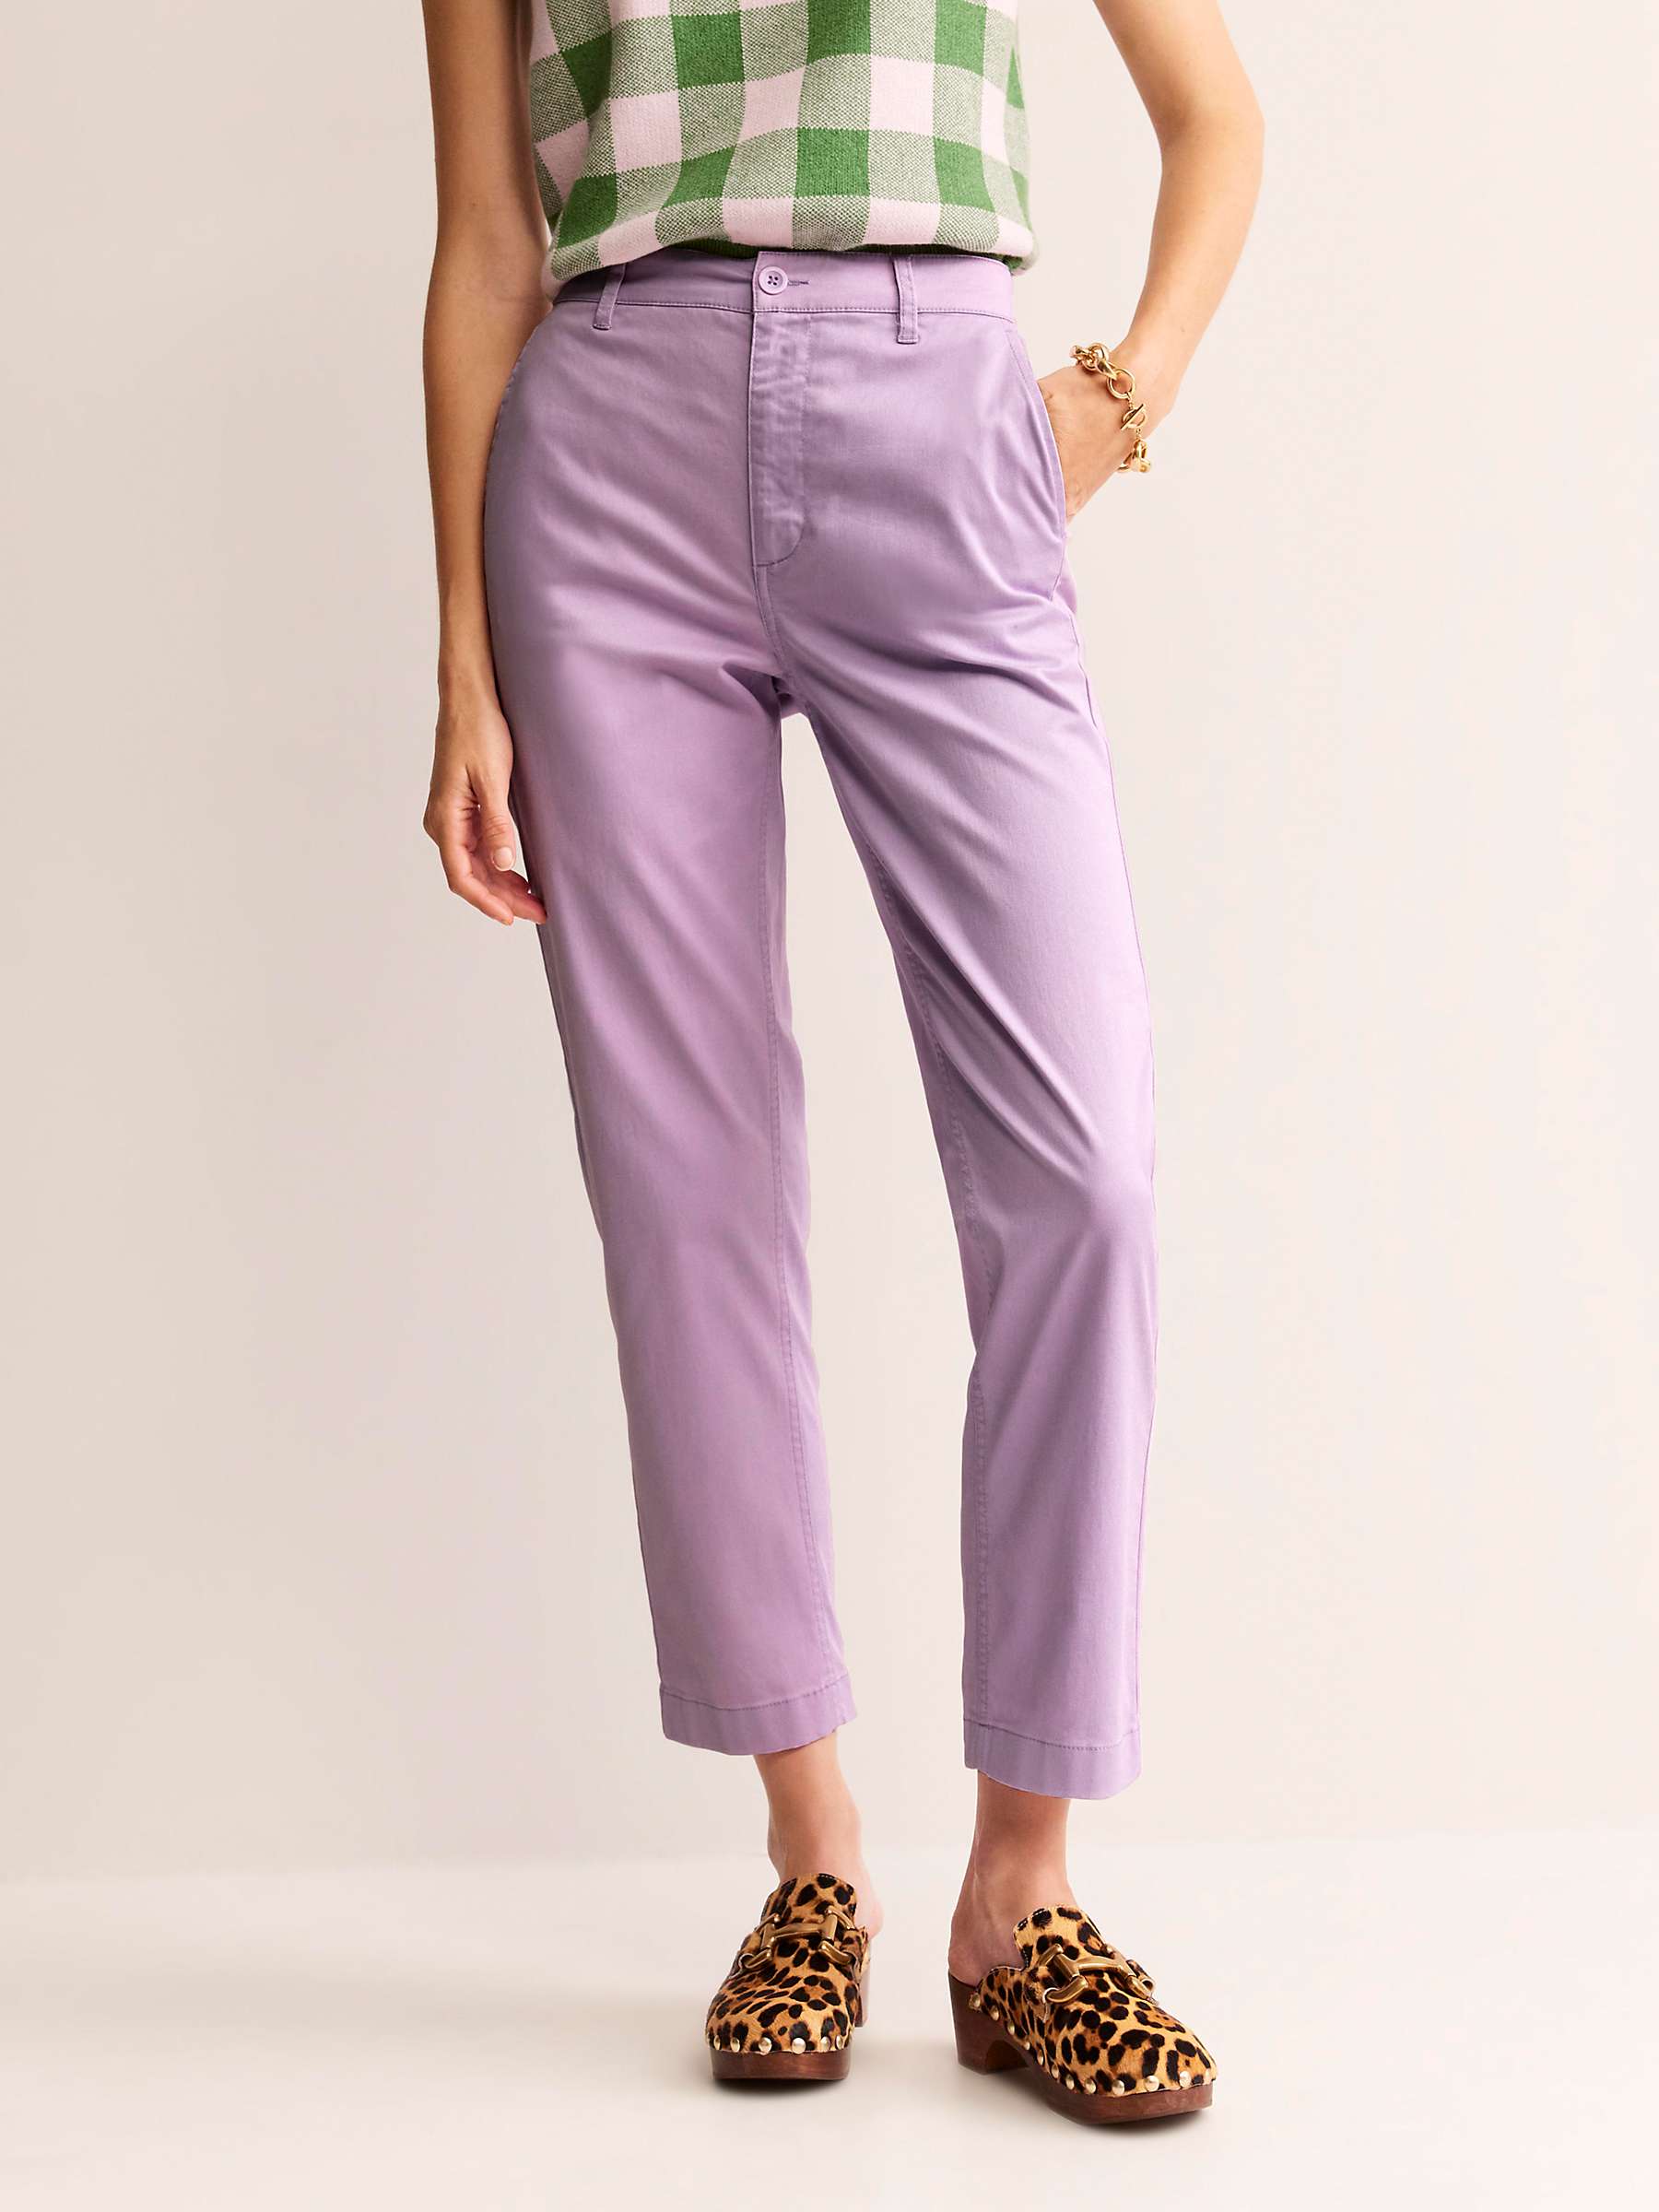 Buy Boden Barnsbury Chino Trousers, Orchid Bloom Online at johnlewis.com